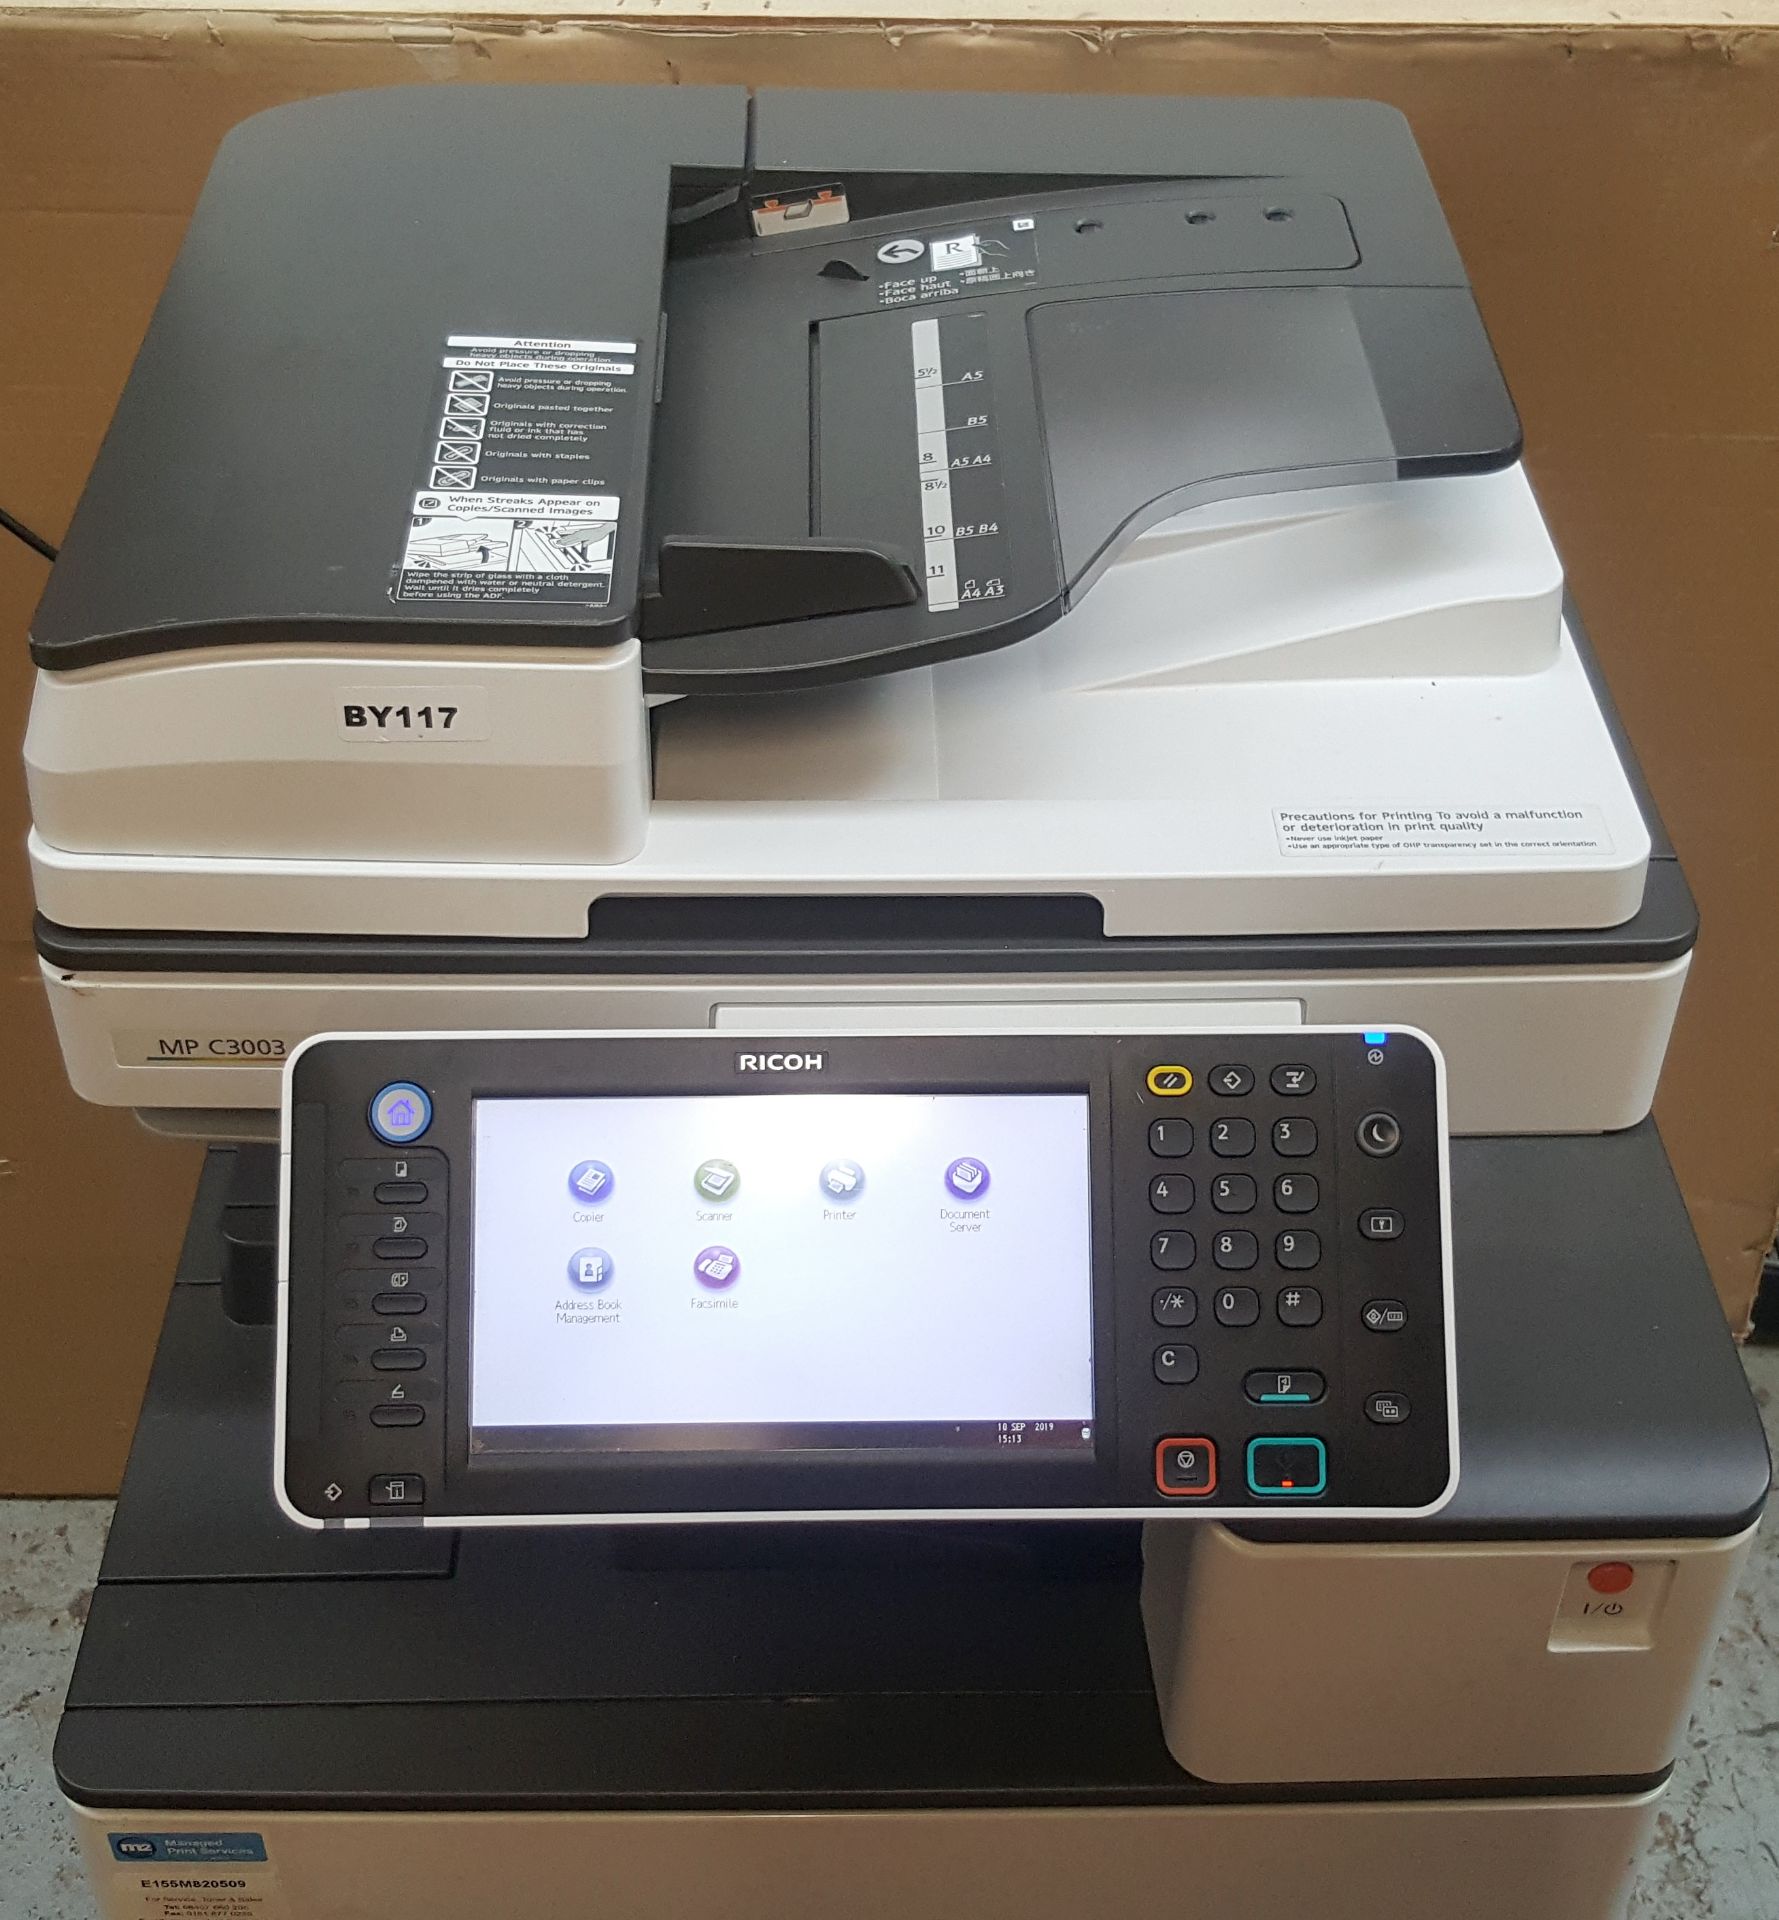 1 x RICOH MP C3003 Color Laser Multifunction Office Printer - Ref BY117 - Image 7 of 7